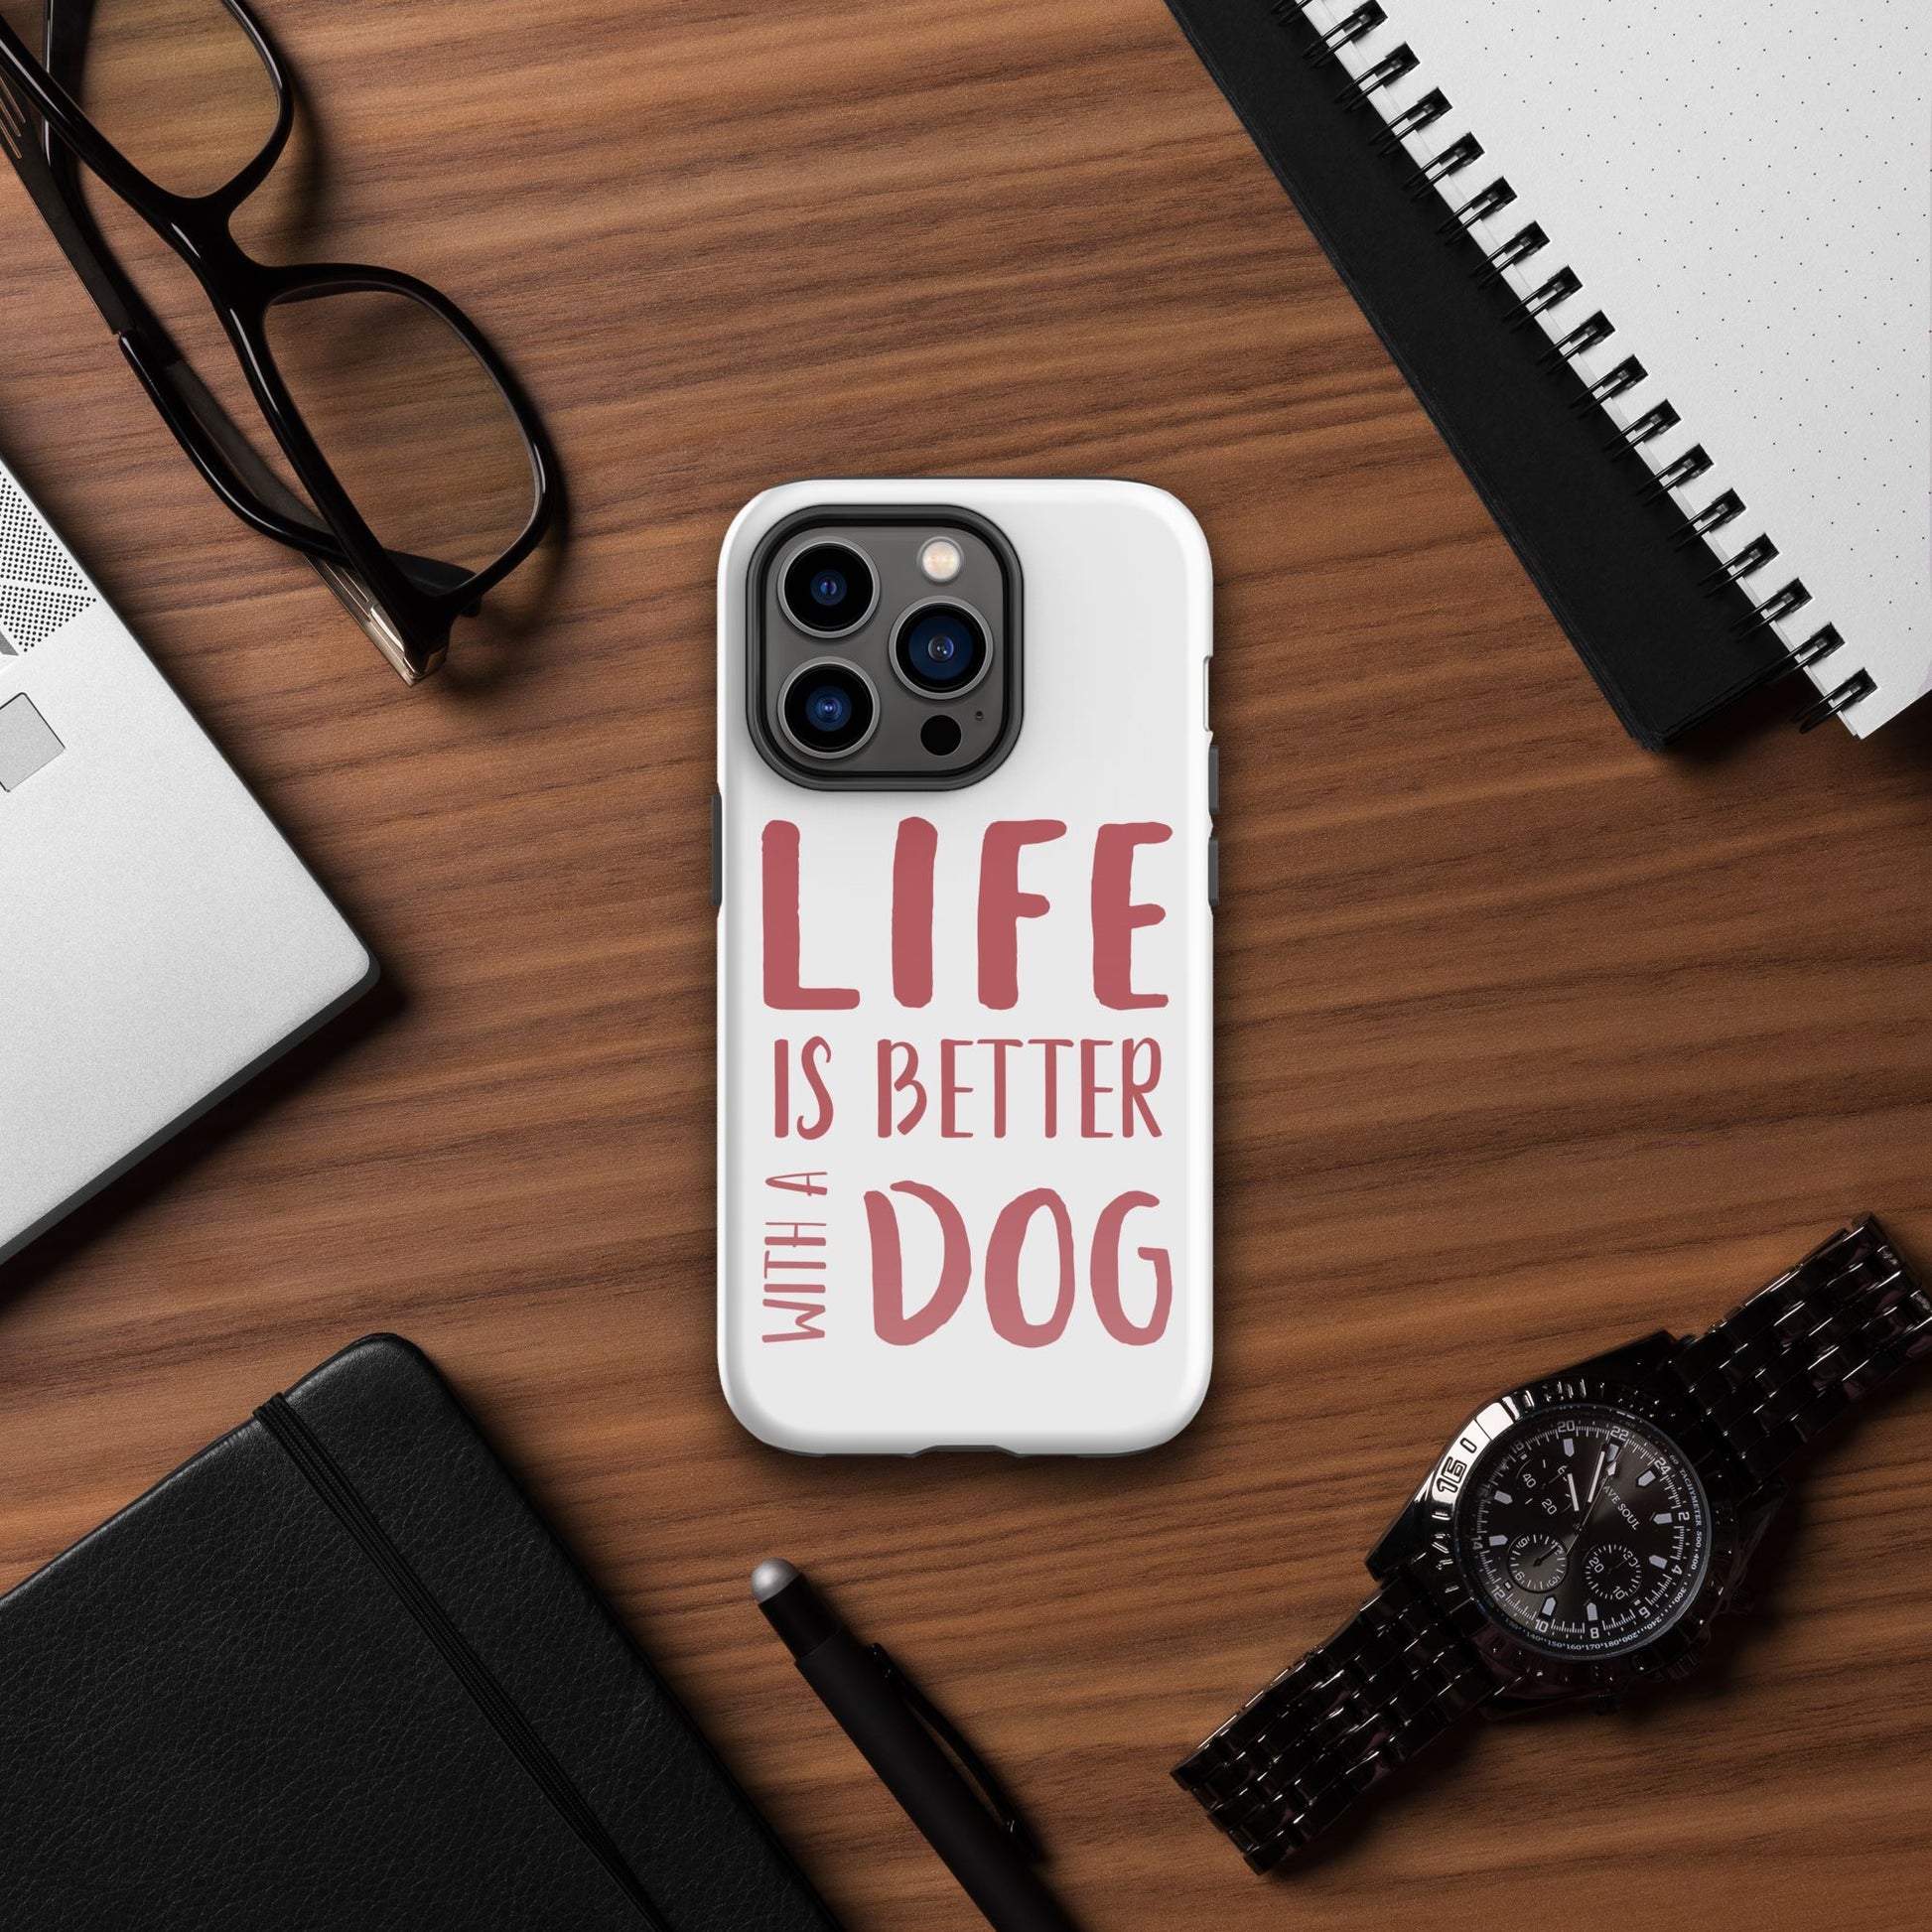 Life is Better with a Dog phone Case is the perfect way to show your love for the furry friends in your life. The phone case is designed to provide protection and comfort with its form-fitting design and shock absorbent materials. Plus, it features a stylish graphic showcasing your canine companions. Show off your pup and protect your phone with this reliable case!